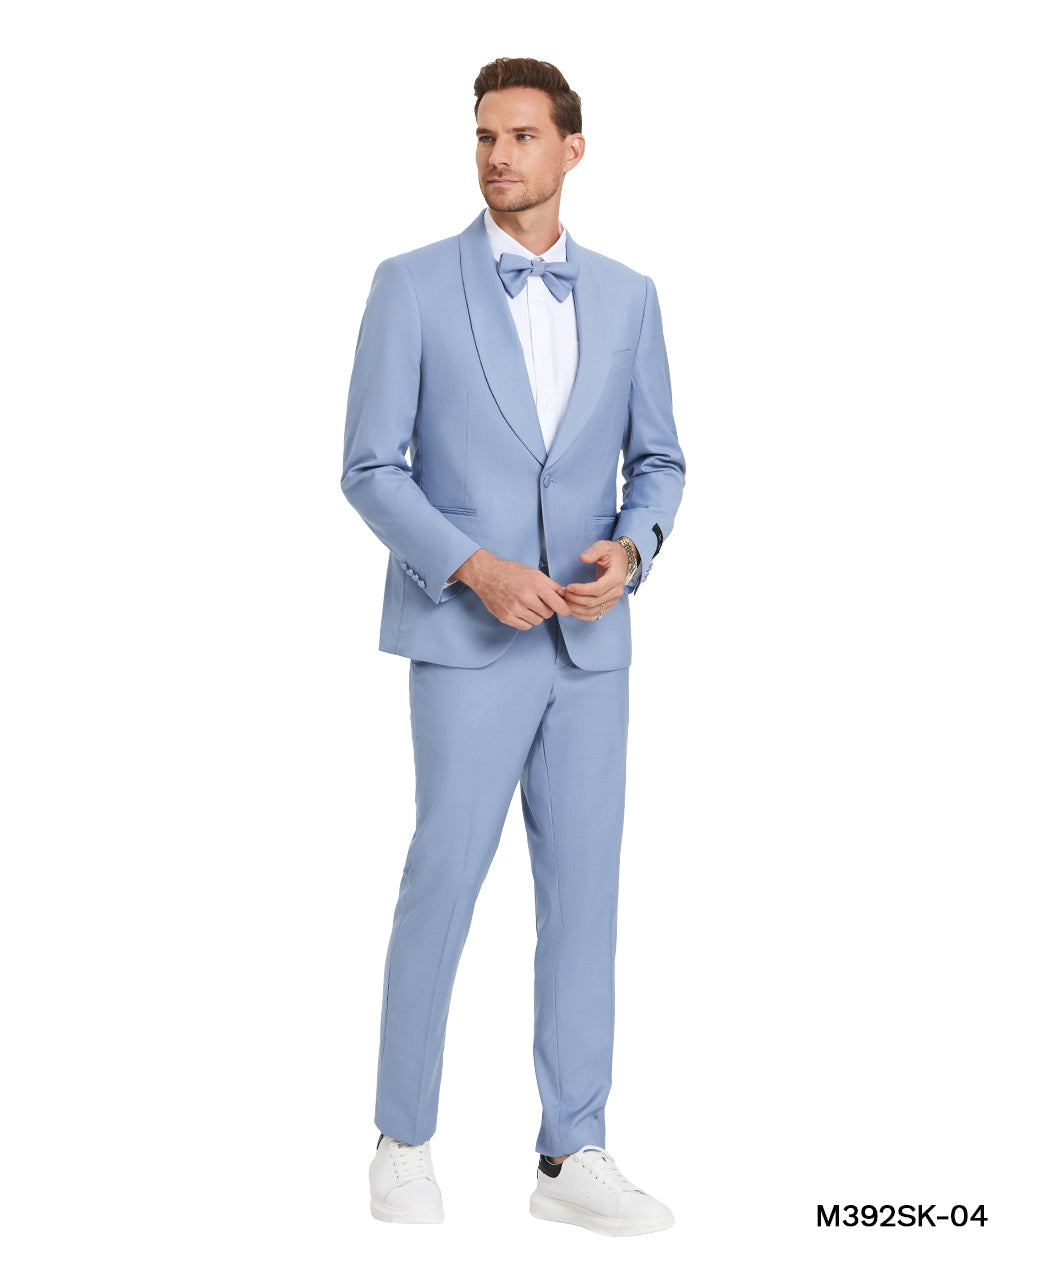 Beau Blue Solid Shawl Collar - Adjustable Waist Band Mens-suit